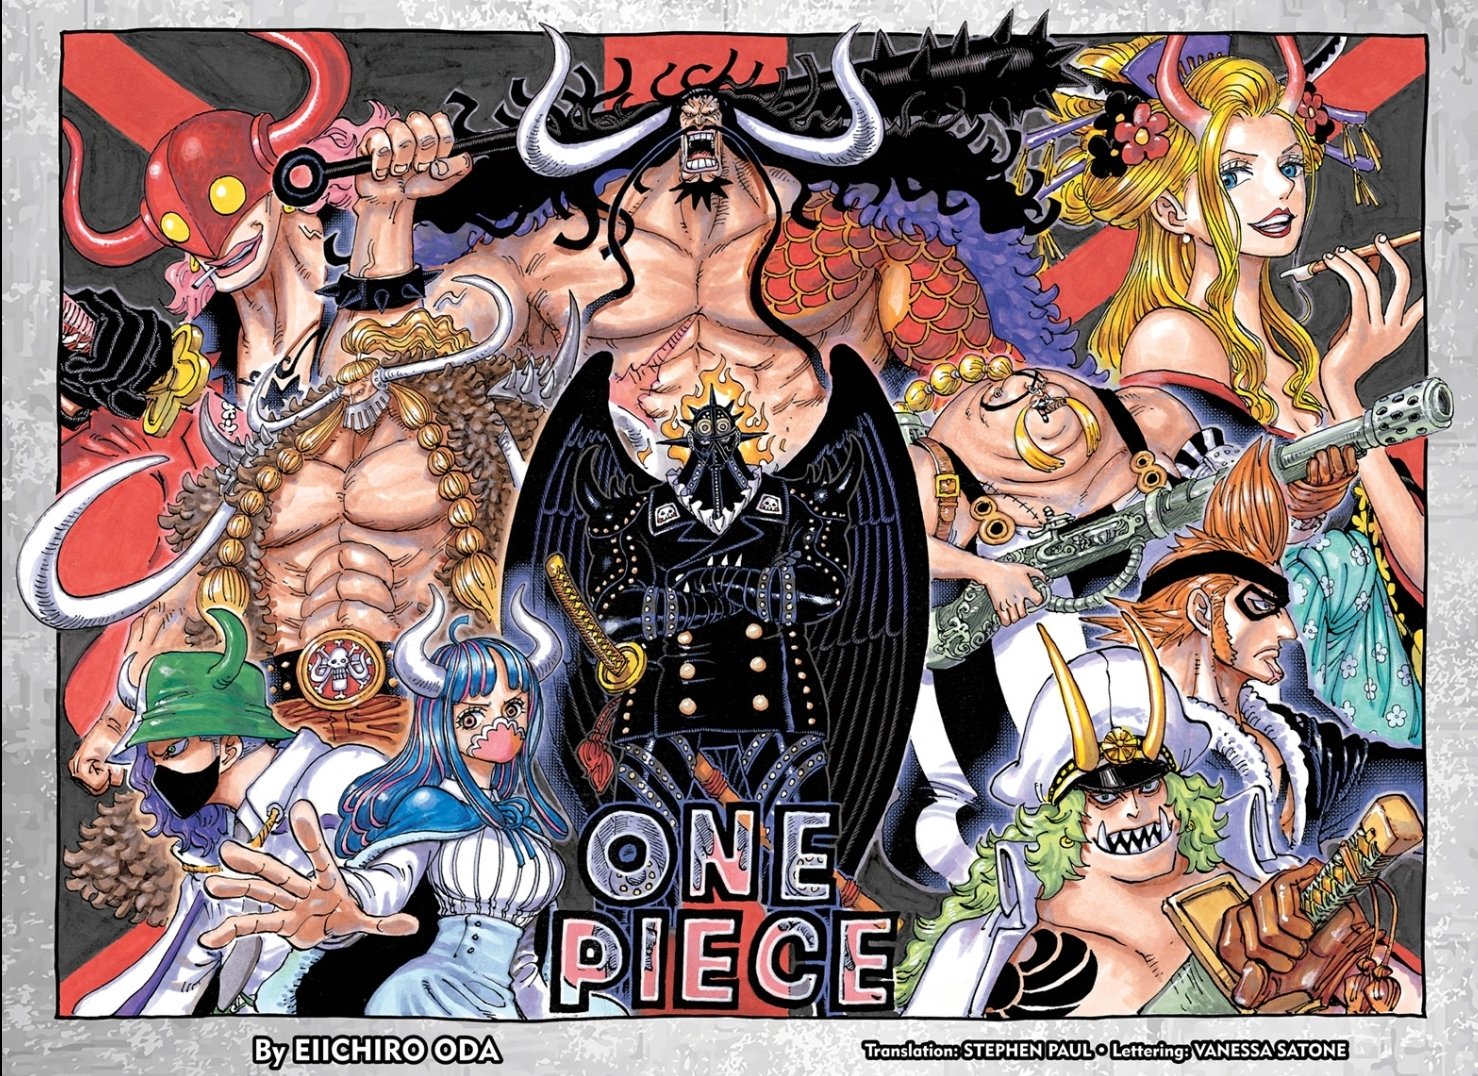 Pin by Shira on King Queen Jack  One piece comic, One piece manga, One  piece pictures